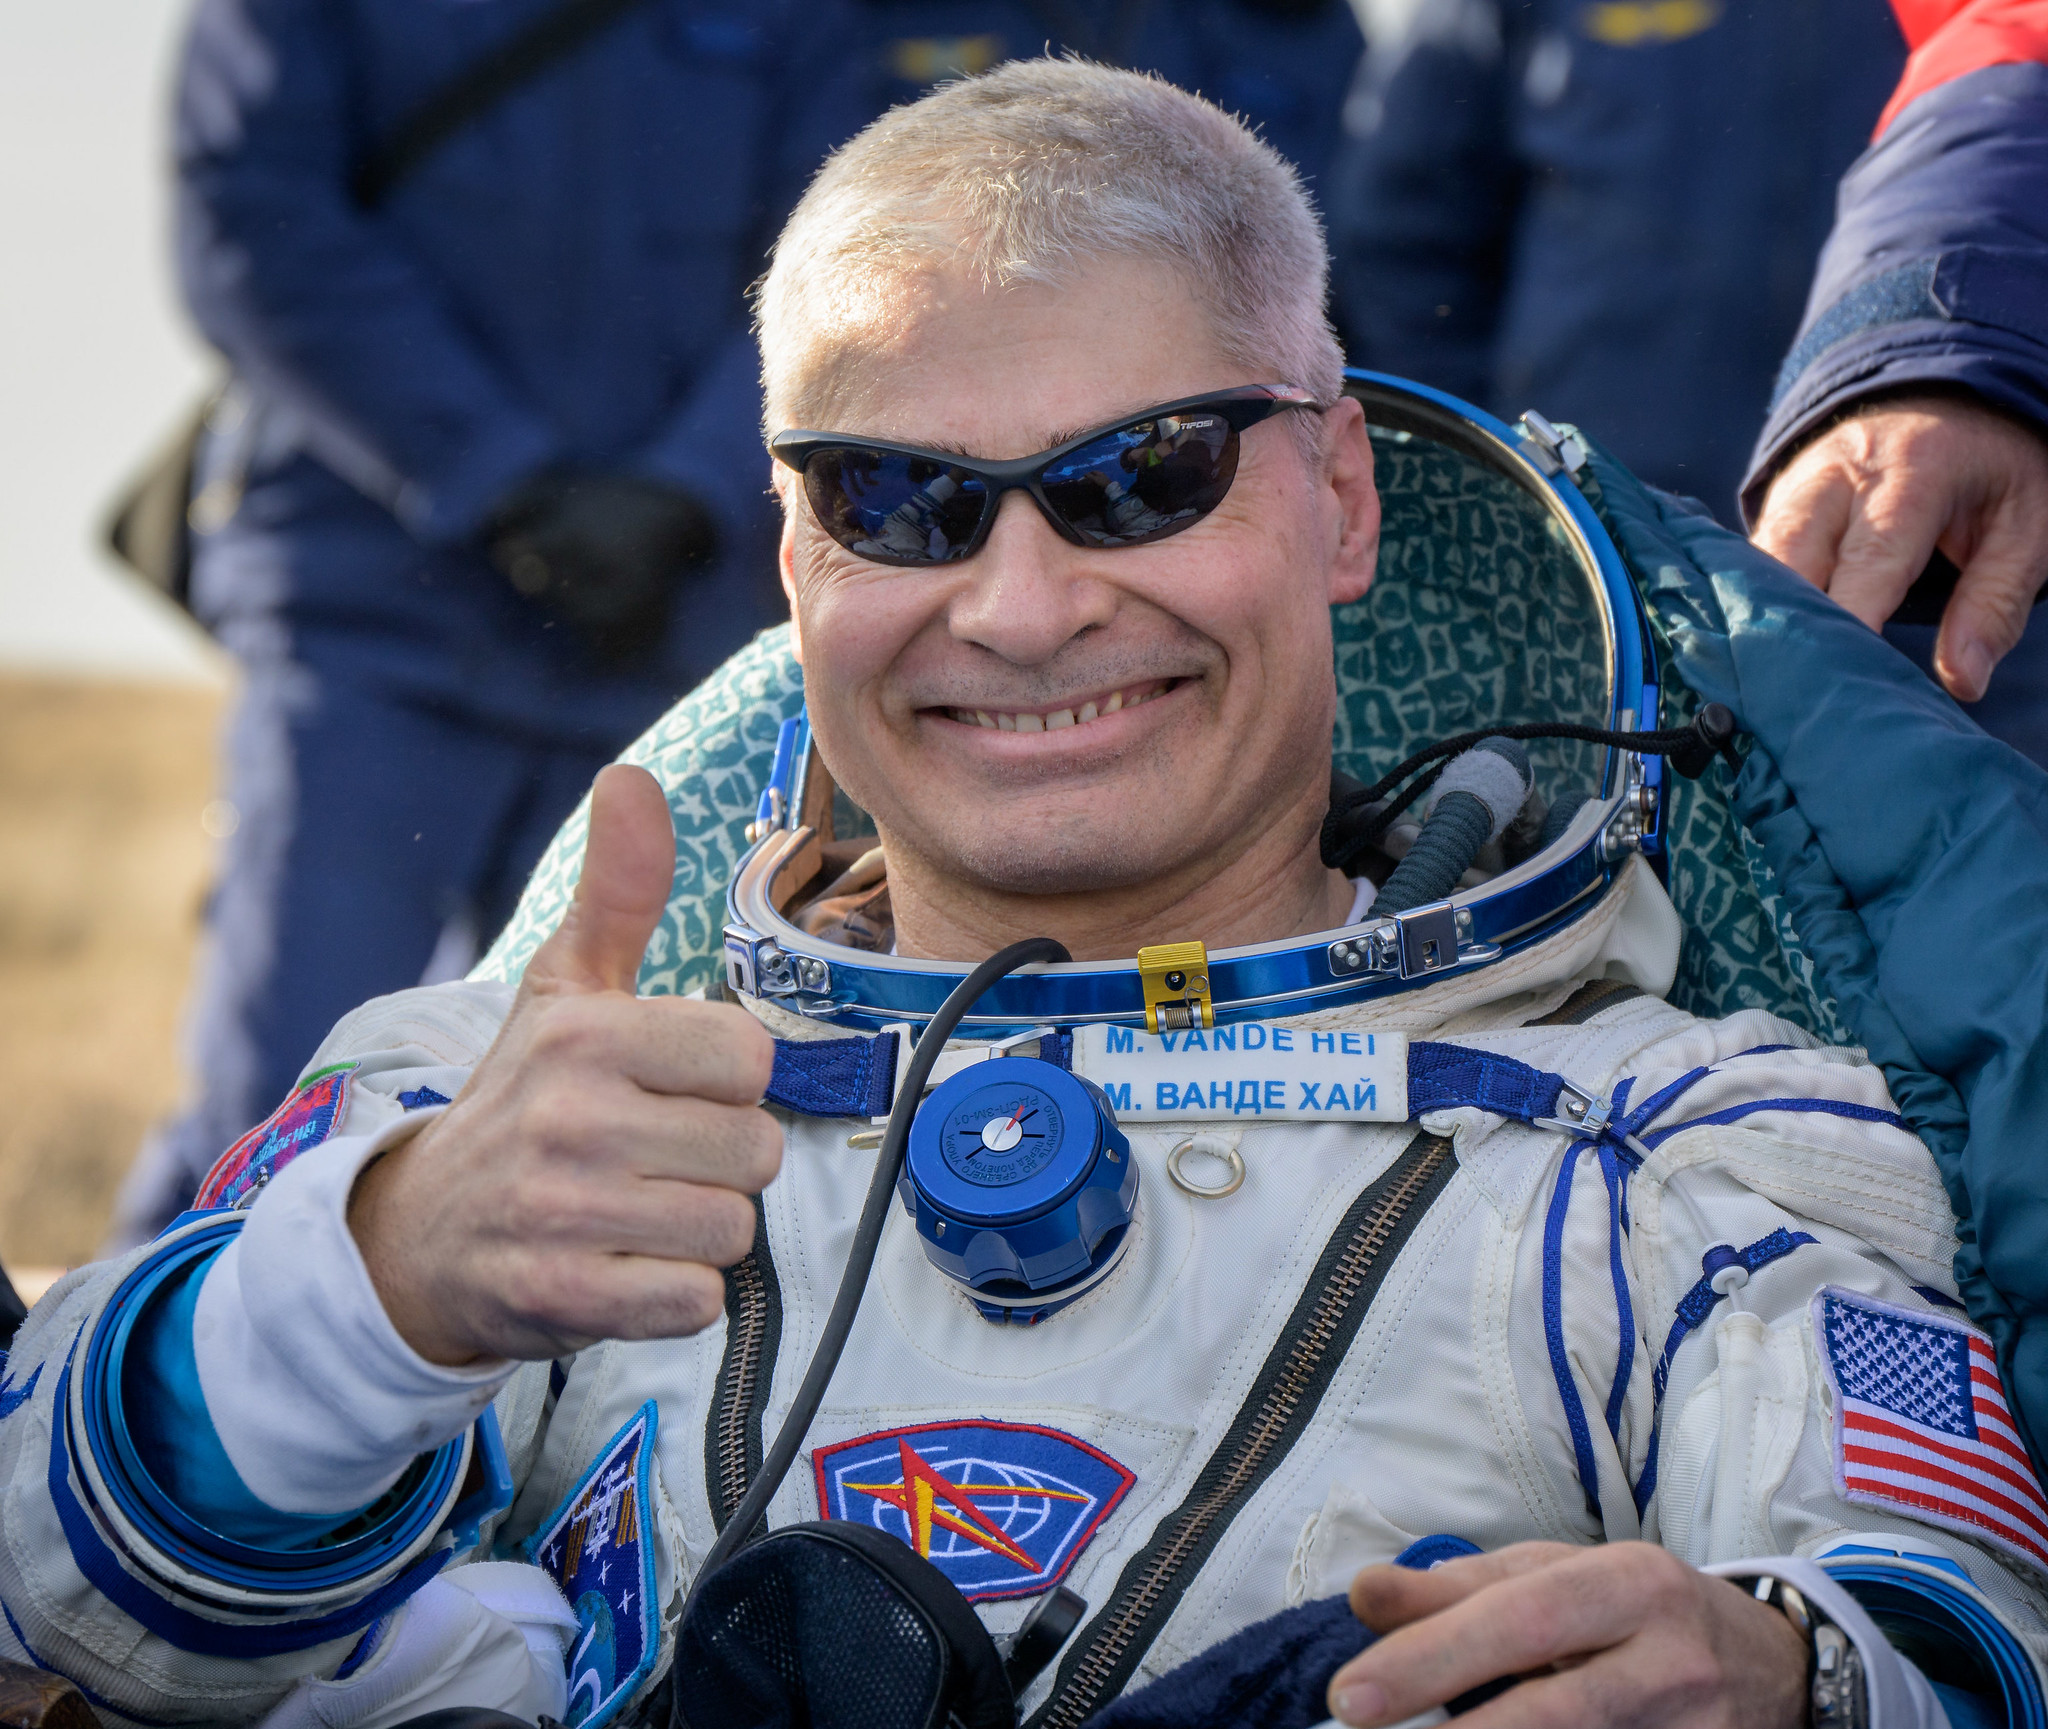 NASA astronaut Mark Vande Hei is seen outside the Soyuz MS-19 spacecraft after he landed with Russian cosmonauts Anton Shkaplerov and Pyotr Dubrov in a remote area near the town of Zhezkazgan, Kazakhstan on Wednesday, March 30, 2022.